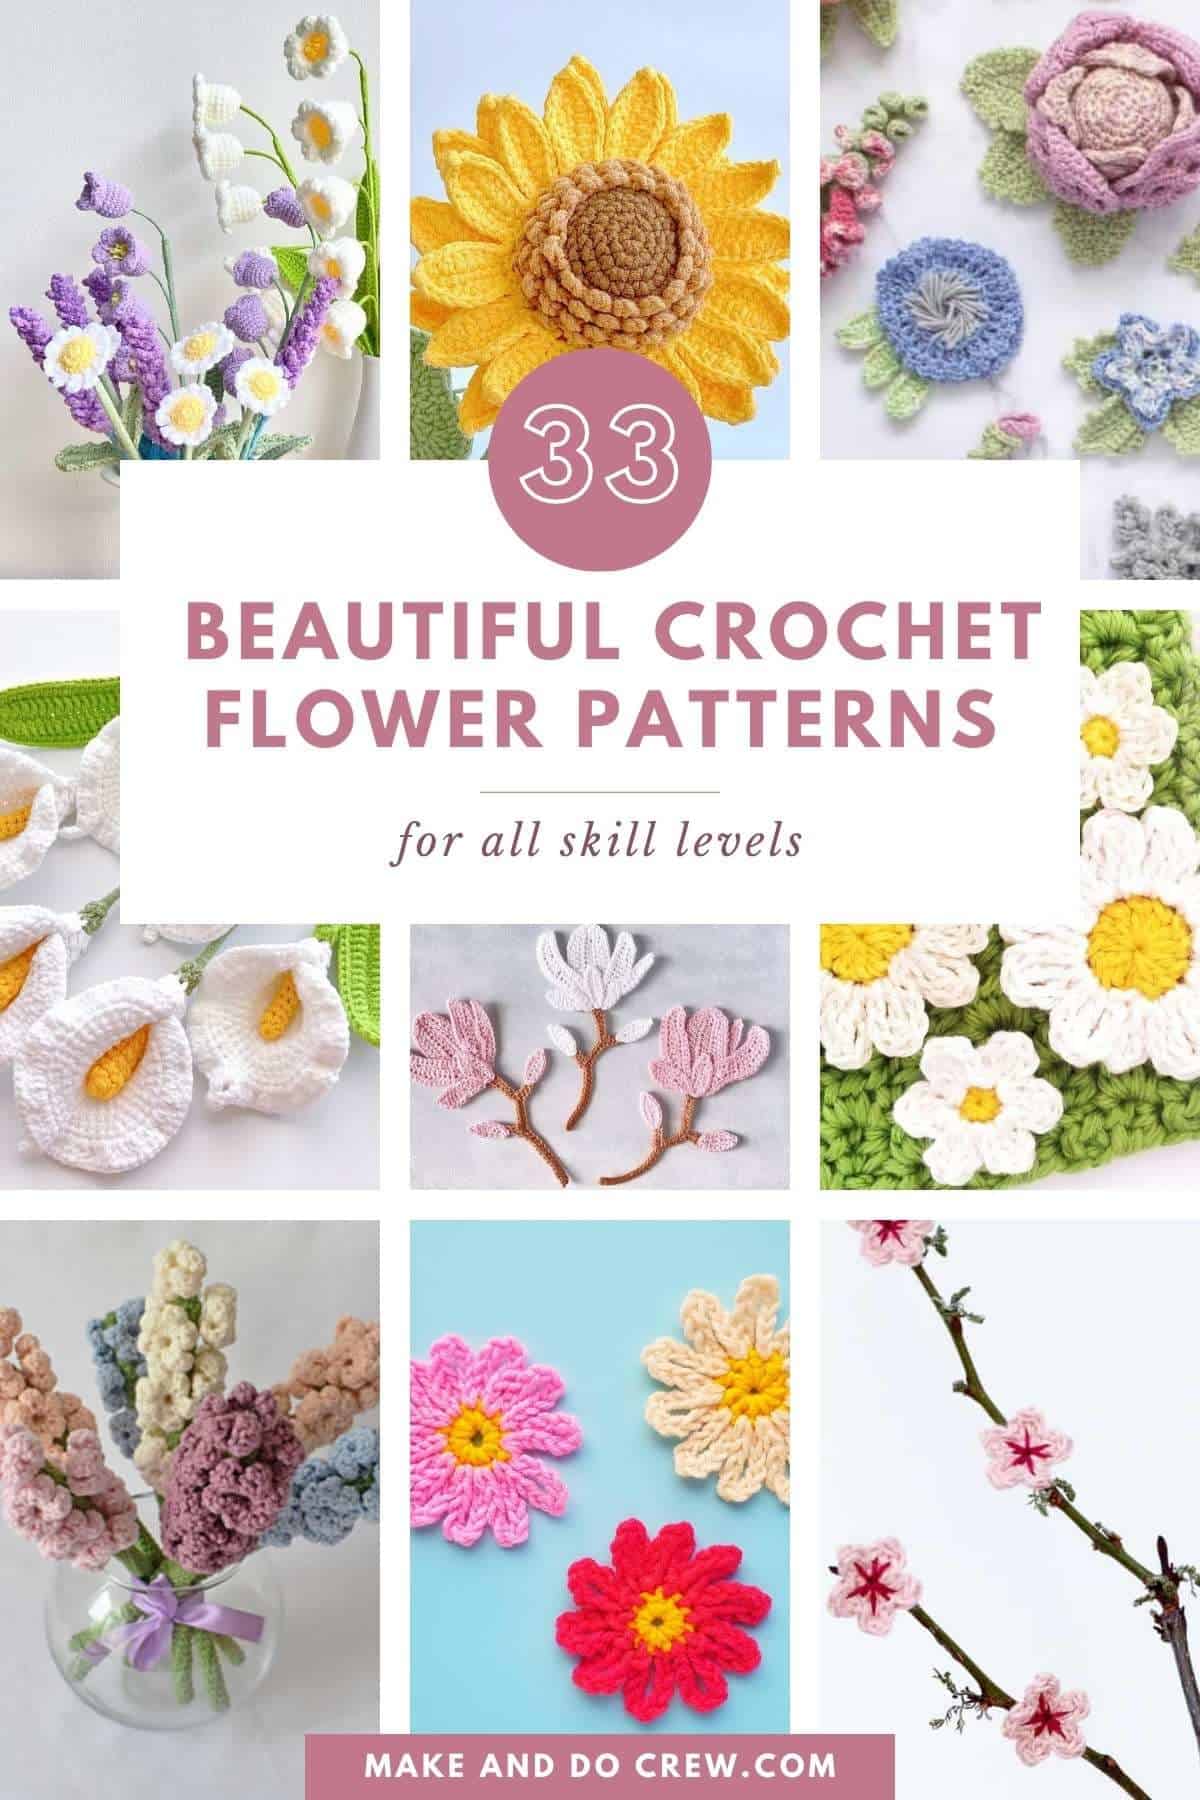 How to Crochet a Flower for Beginners + 33 Easy Patterns